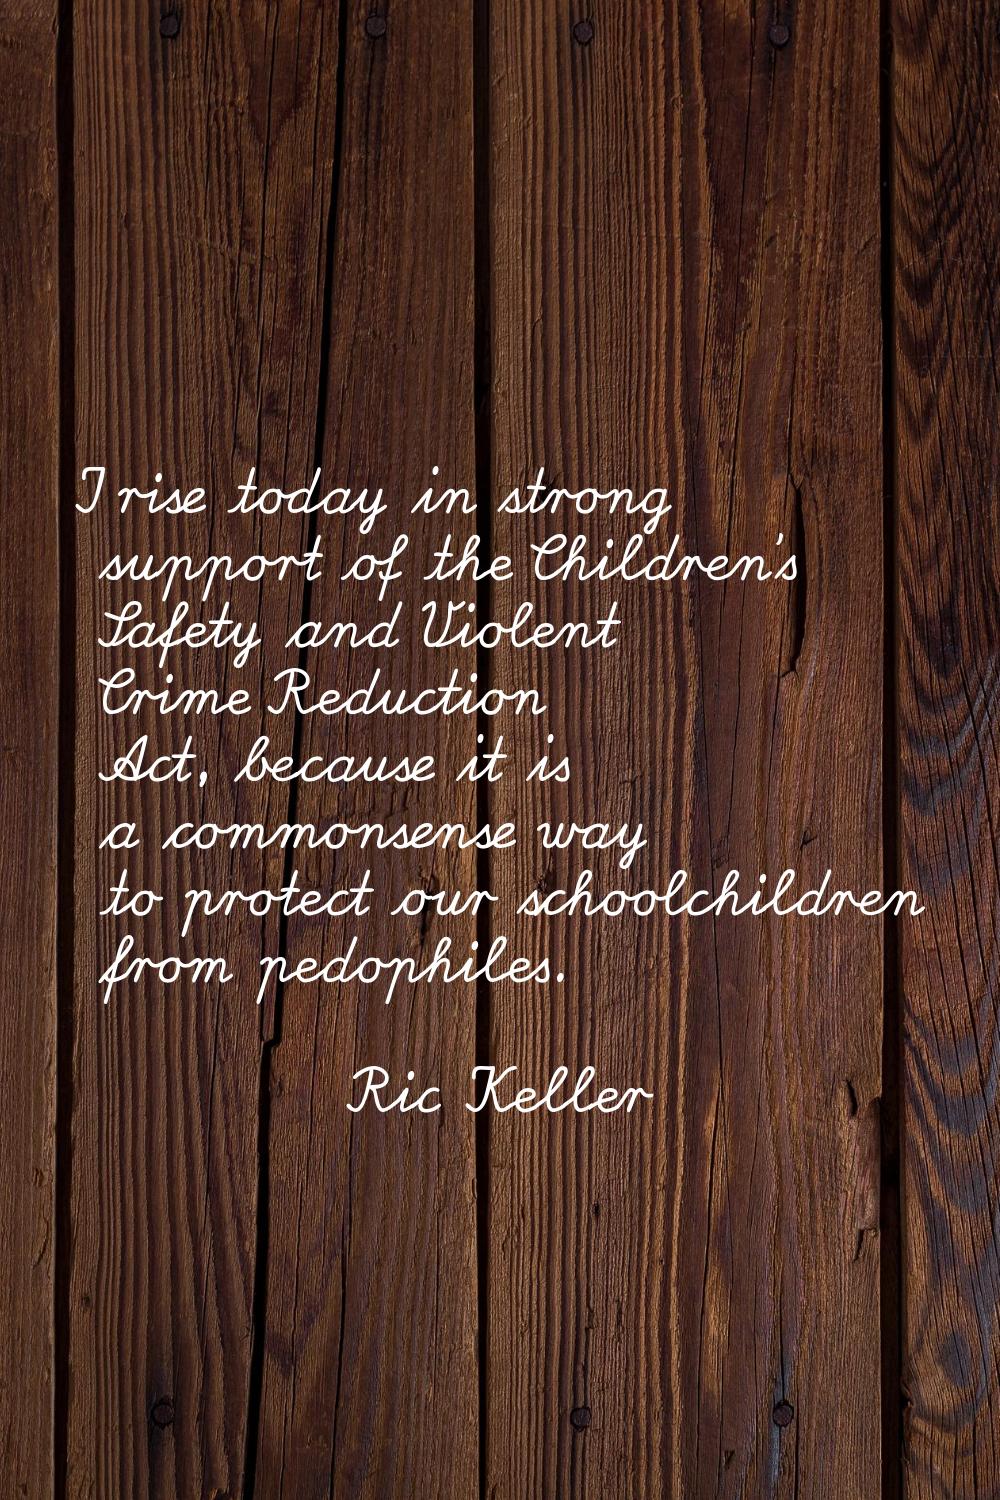 I rise today in strong support of the Children's Safety and Violent Crime Reduction Act, because it